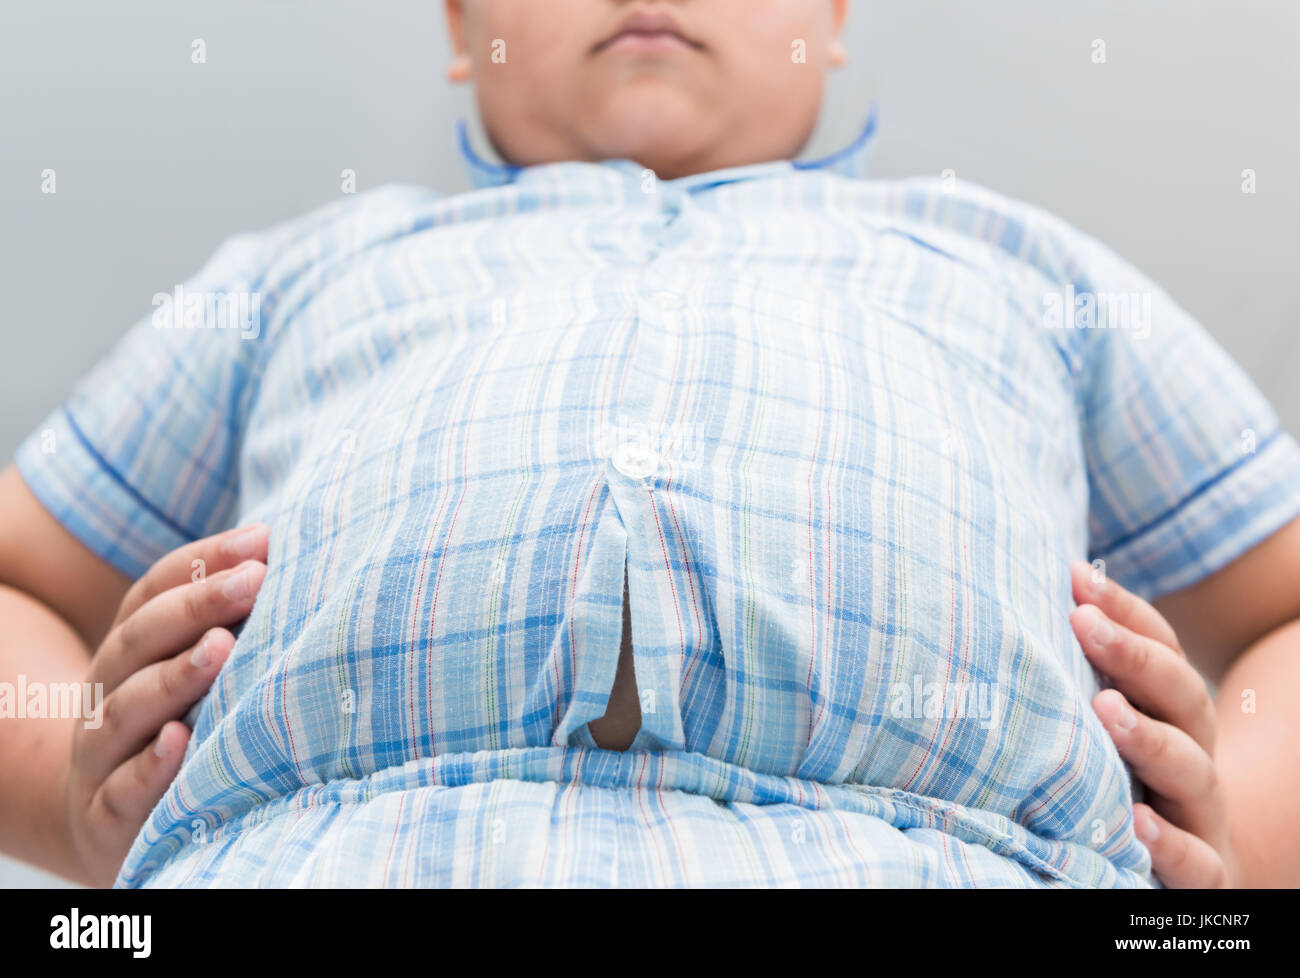 Obese fat boy overweight. Tight shirt of pajamas, healthy concept Stock Photo